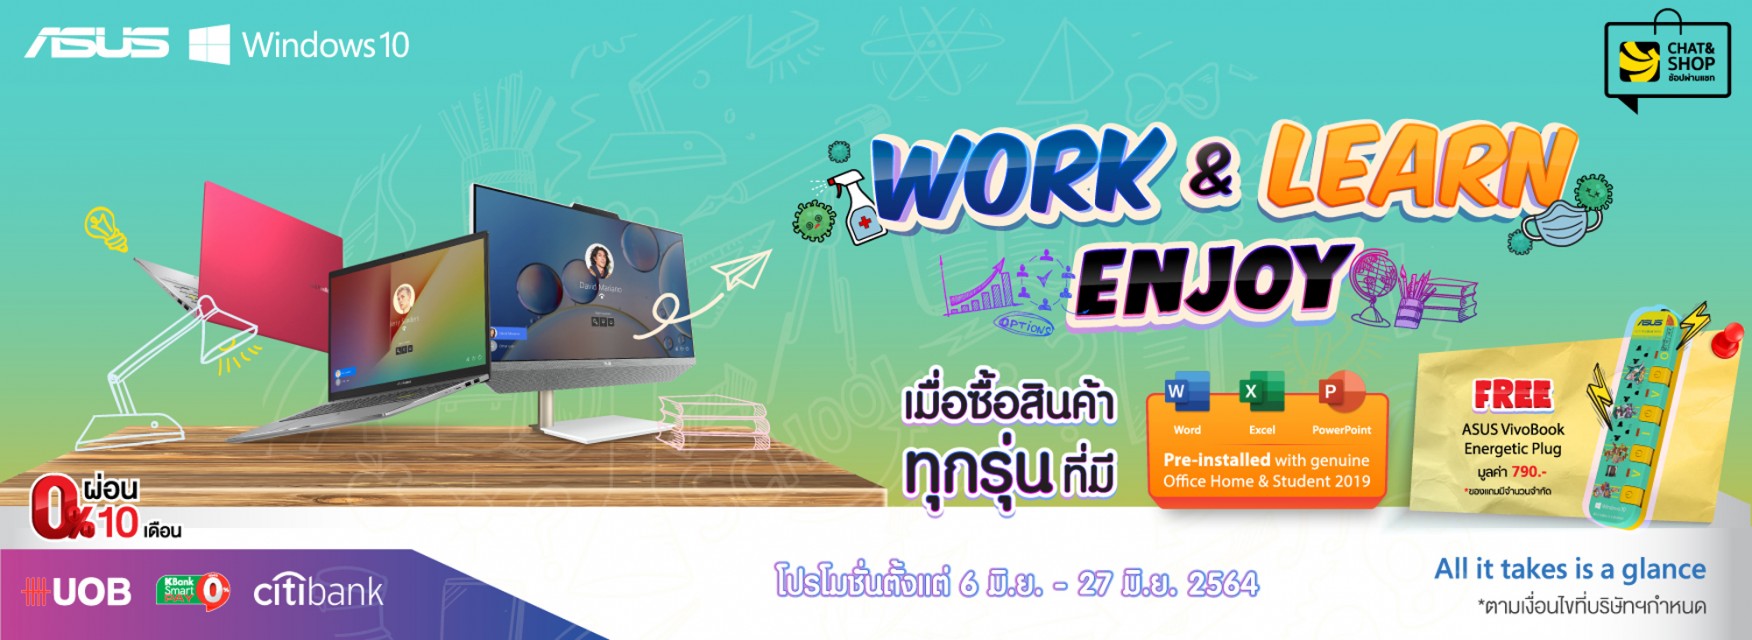 Asus Work and Learn enjoy